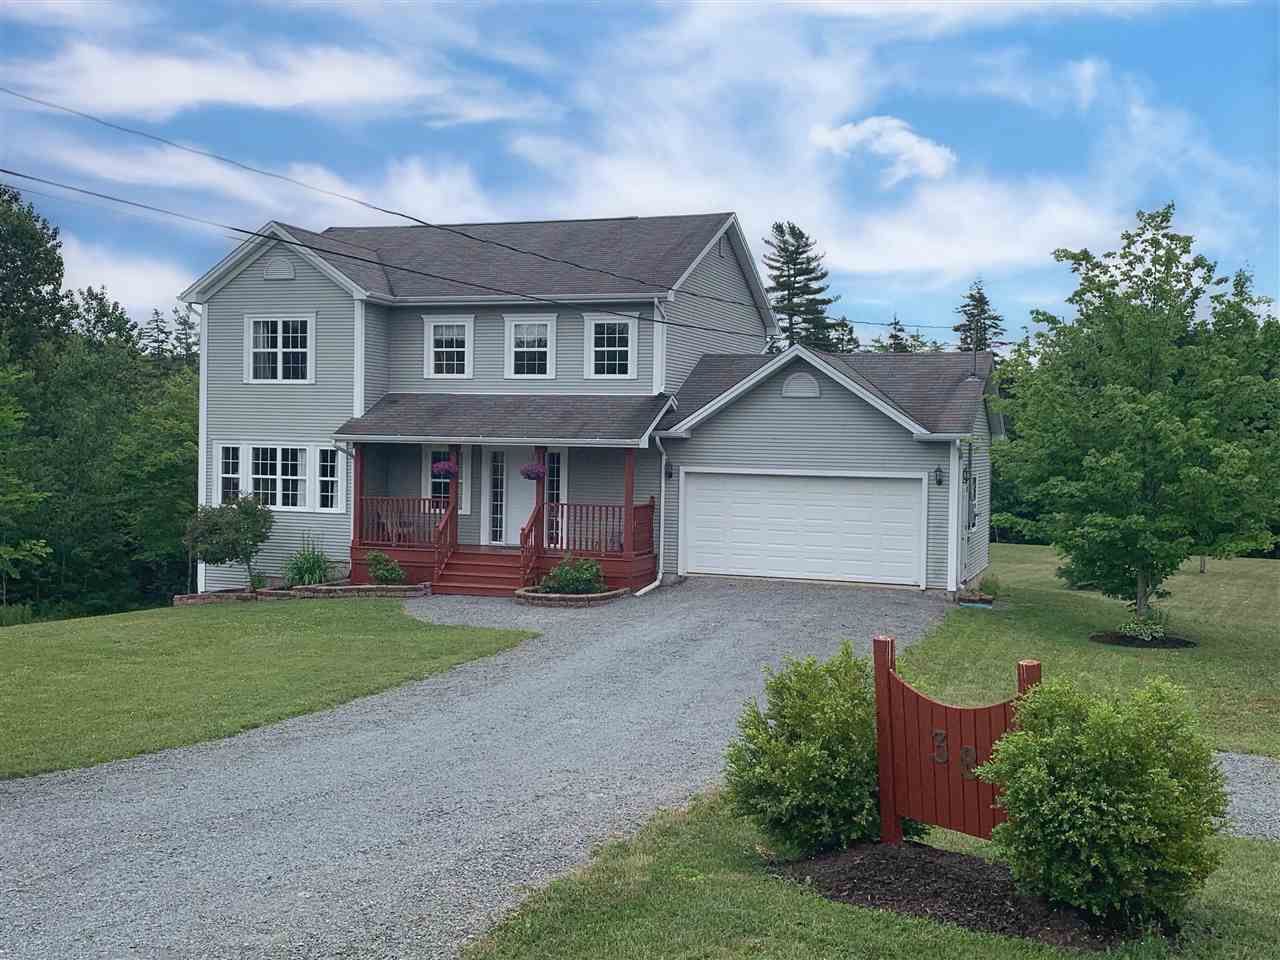 Main Photo: 38 Valerie Court in Windsor Junction: 30-Waverley, Fall River, Oakfield Residential for sale (Halifax-Dartmouth)  : MLS®# 202011734